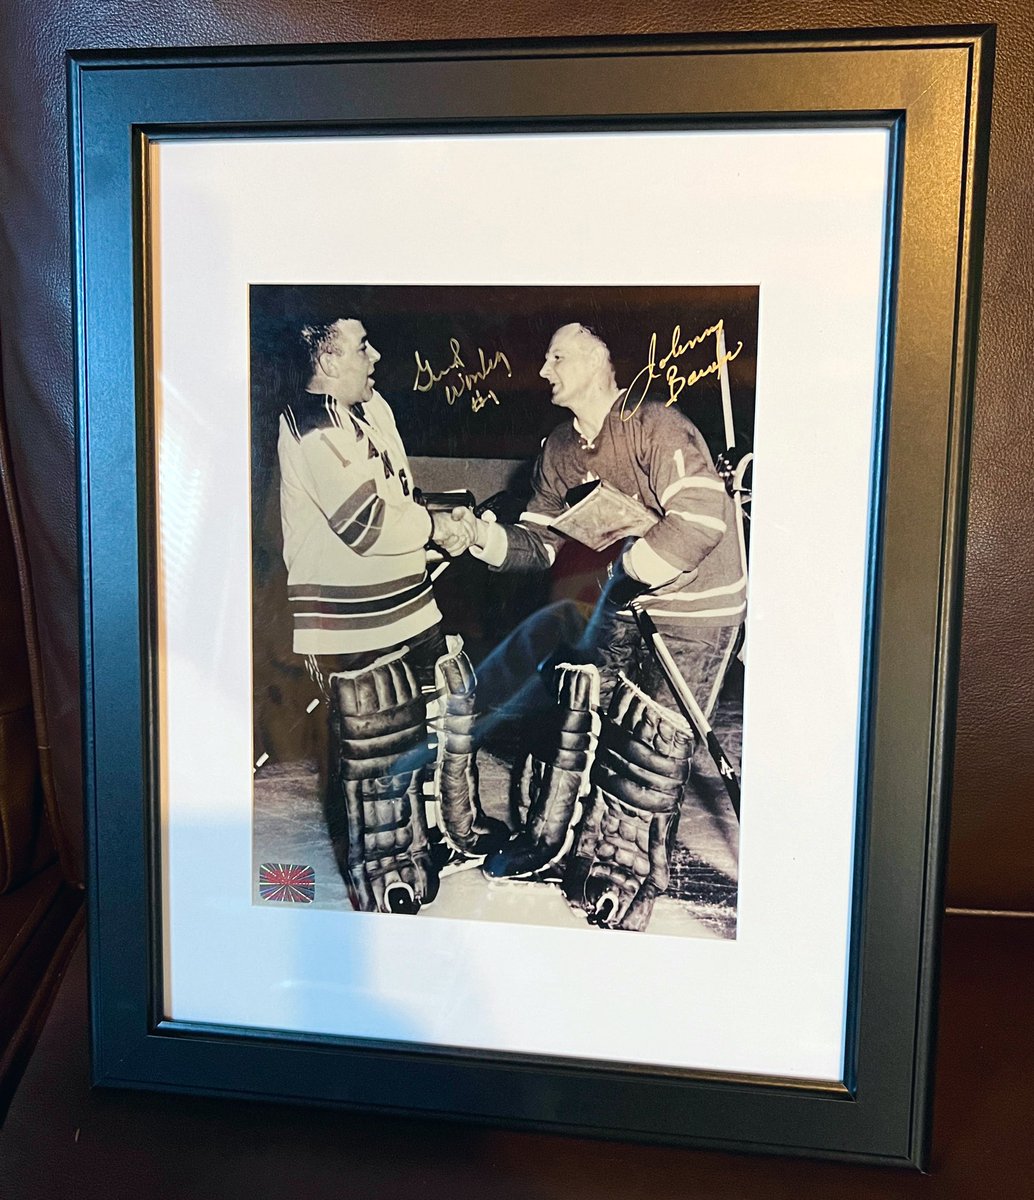 These guys were both before my time, but this autograph pic is one of my favourite hockey things that I have..